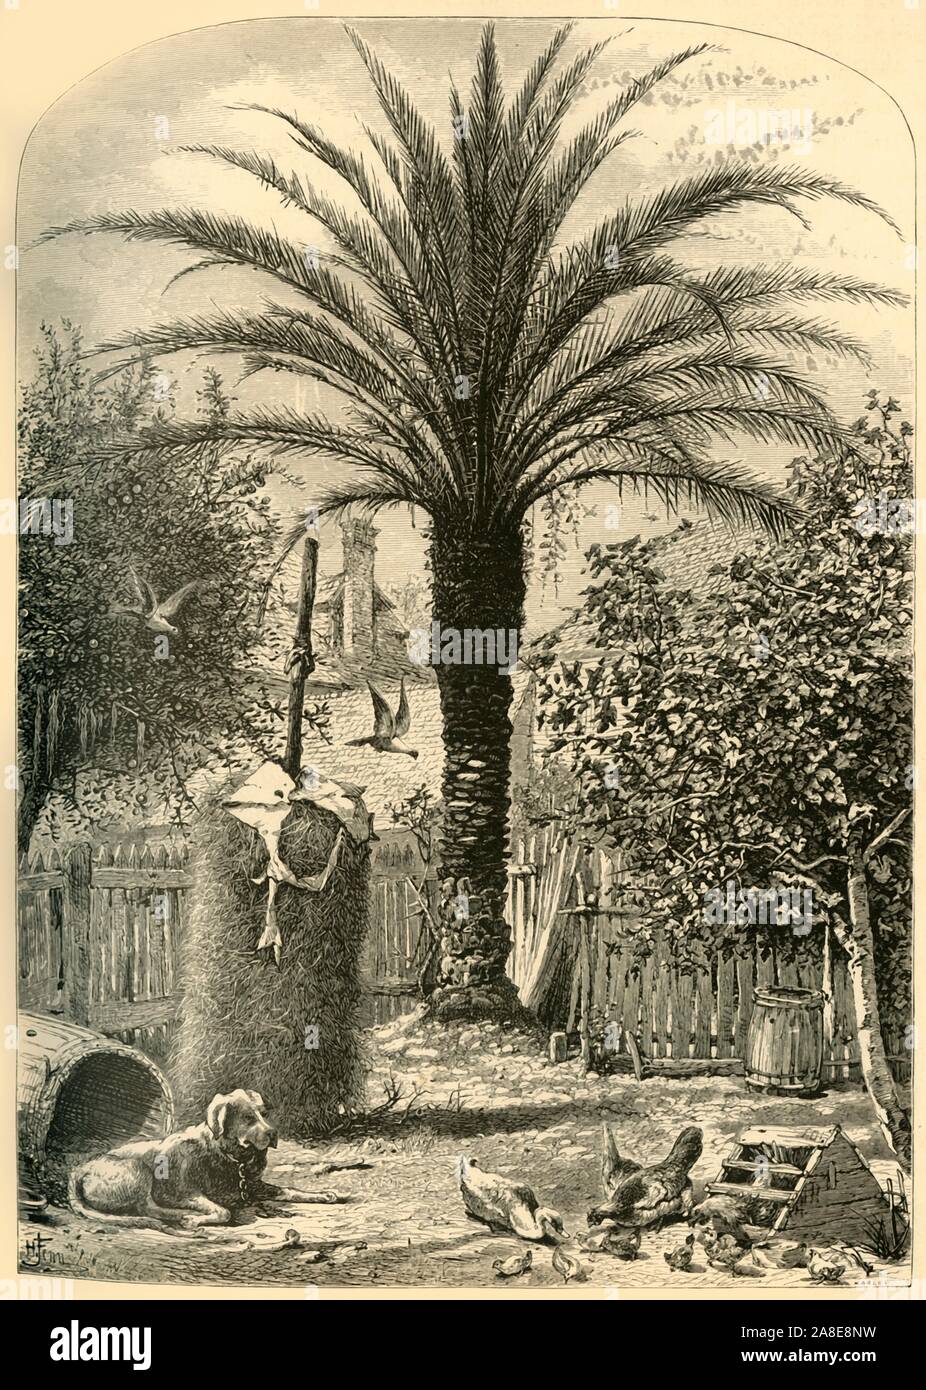 'Scene in St. Augustine - The Date Palm', 1872. Palm tree, chained dog and chickens in a back yard in St Augustine, Florida, USA. From &quot;Picturesque America; or, The Land We Live In, A Delineation by Pen and Pencil of the Mountains, Rivers, Lakes...with Illustrations on Steel and Wood by Eminent American Artists&quot; Vol. I, edited by William Cullen Bryant. [D. Appleton and Company, New York, 1872] Stock Photo